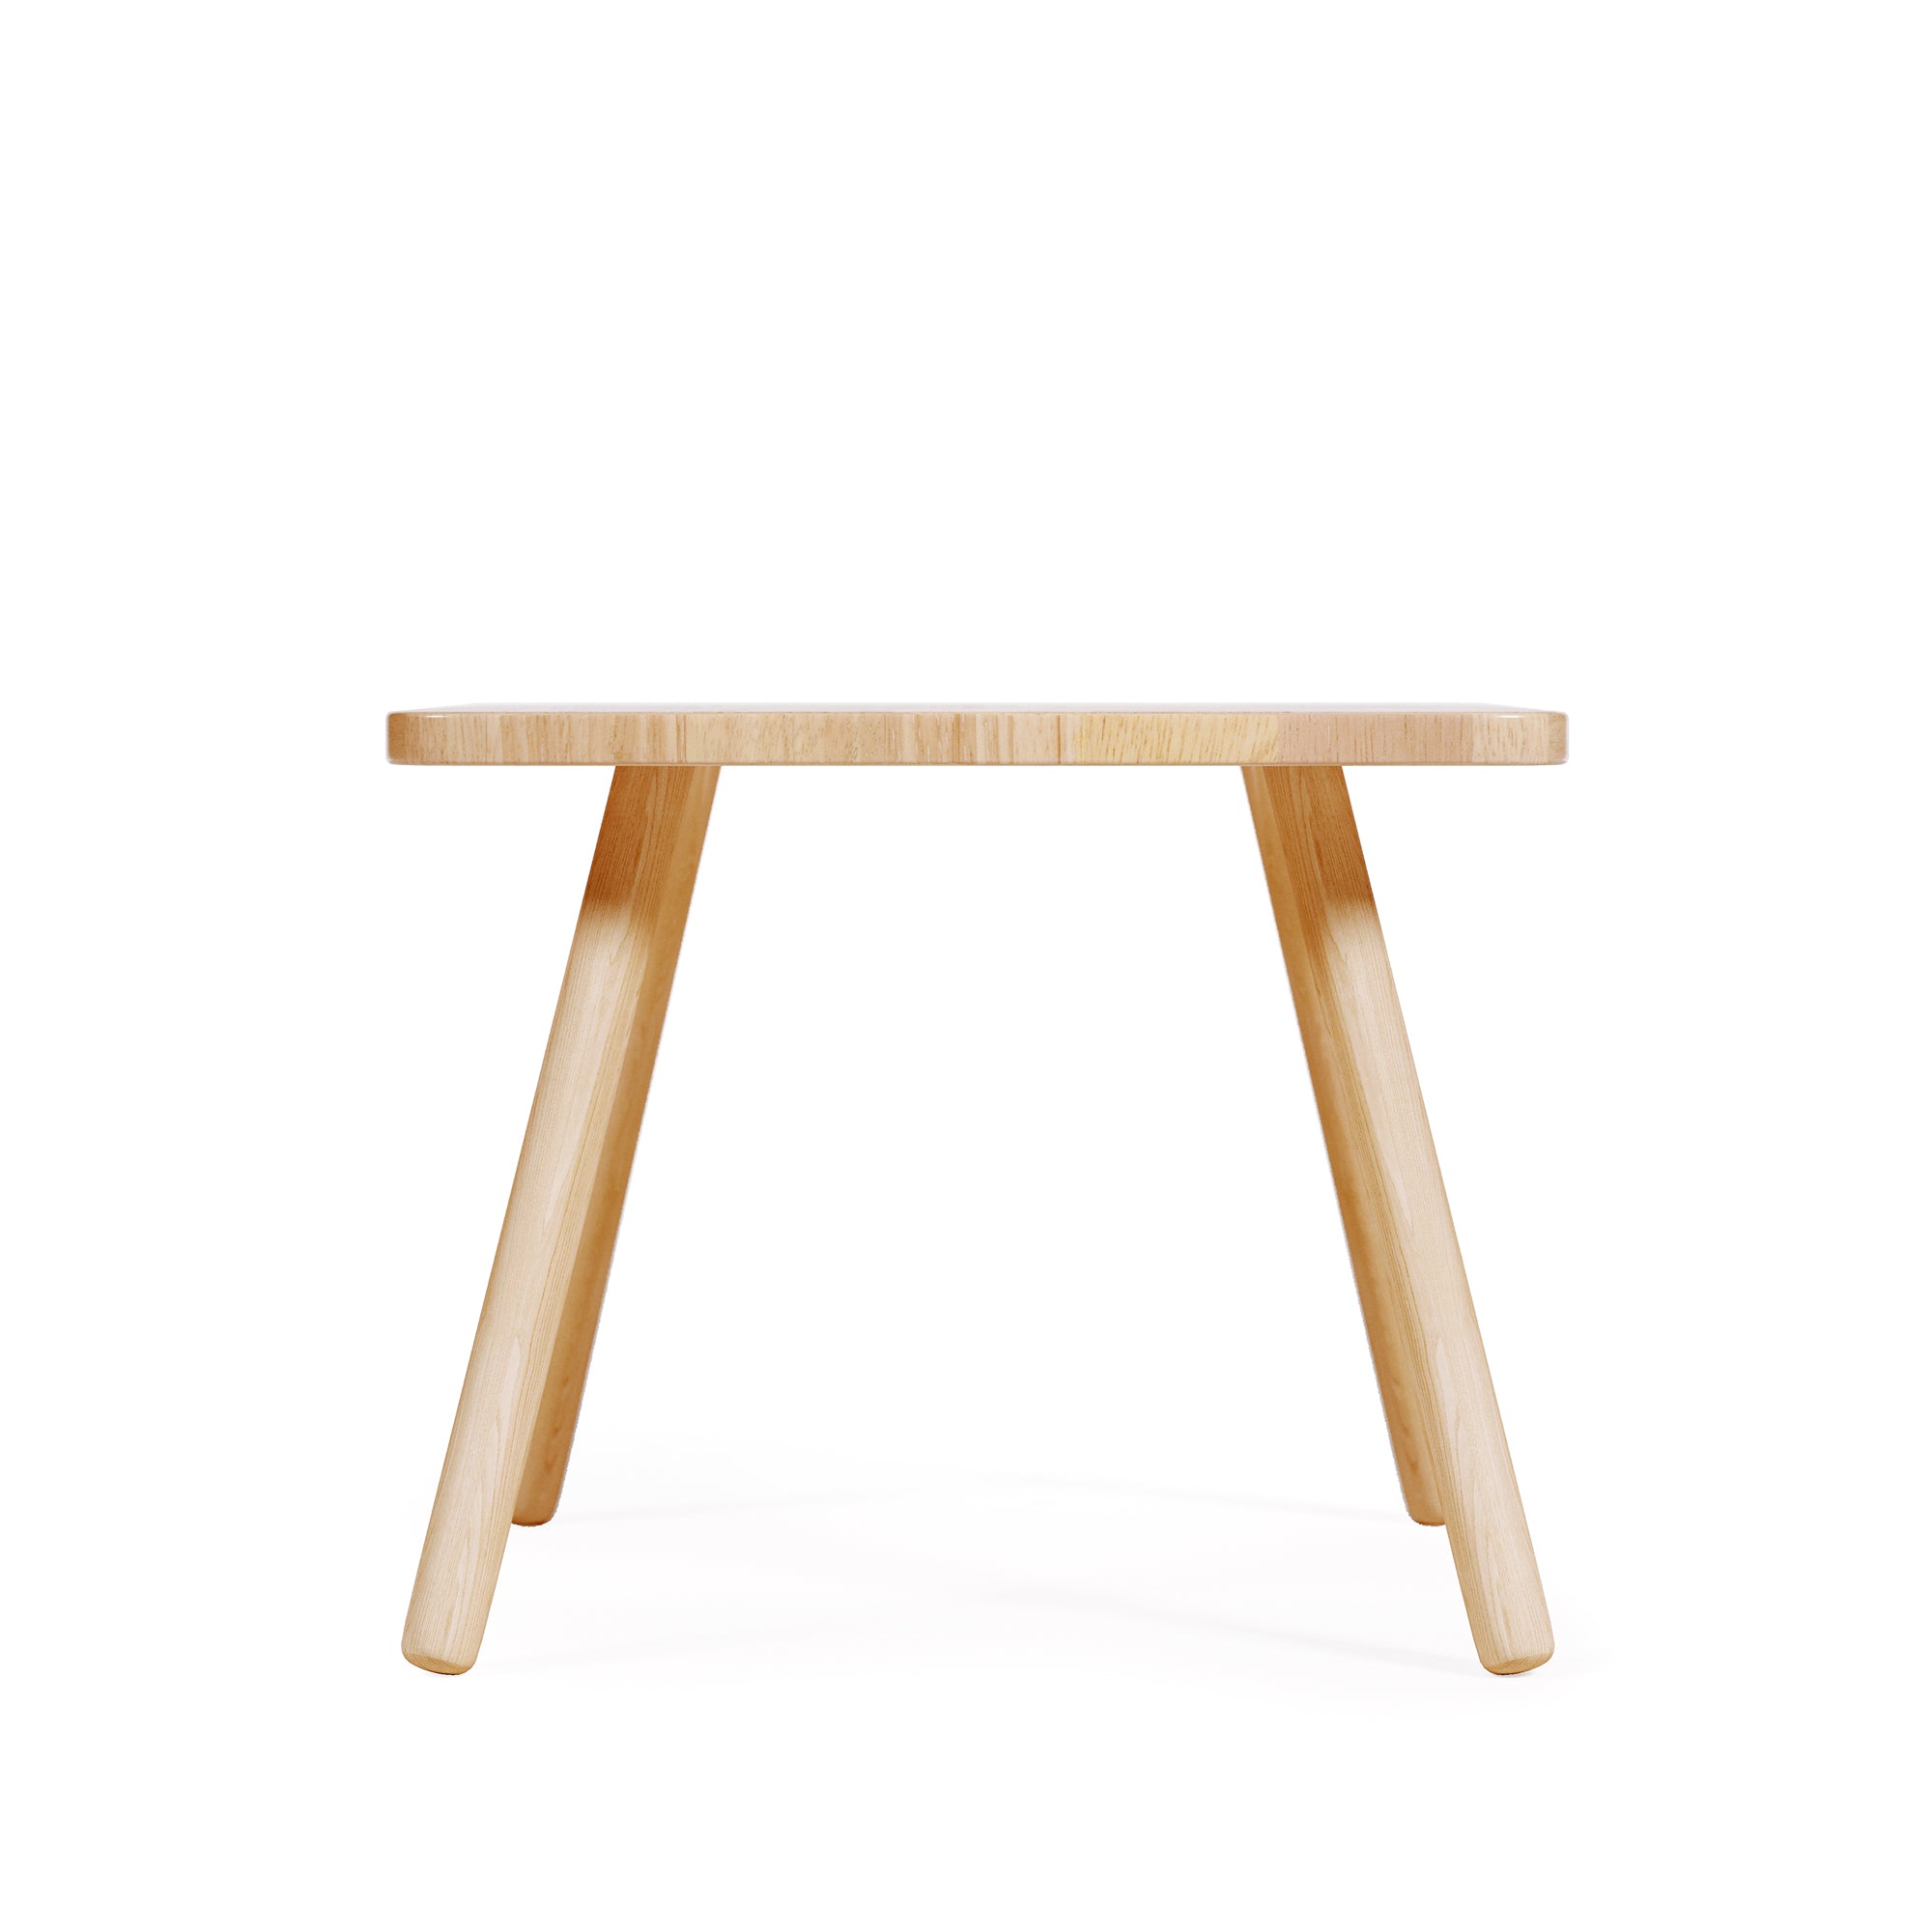 Square Dilcia kids table in solid rubber wood 55 x 55 cm